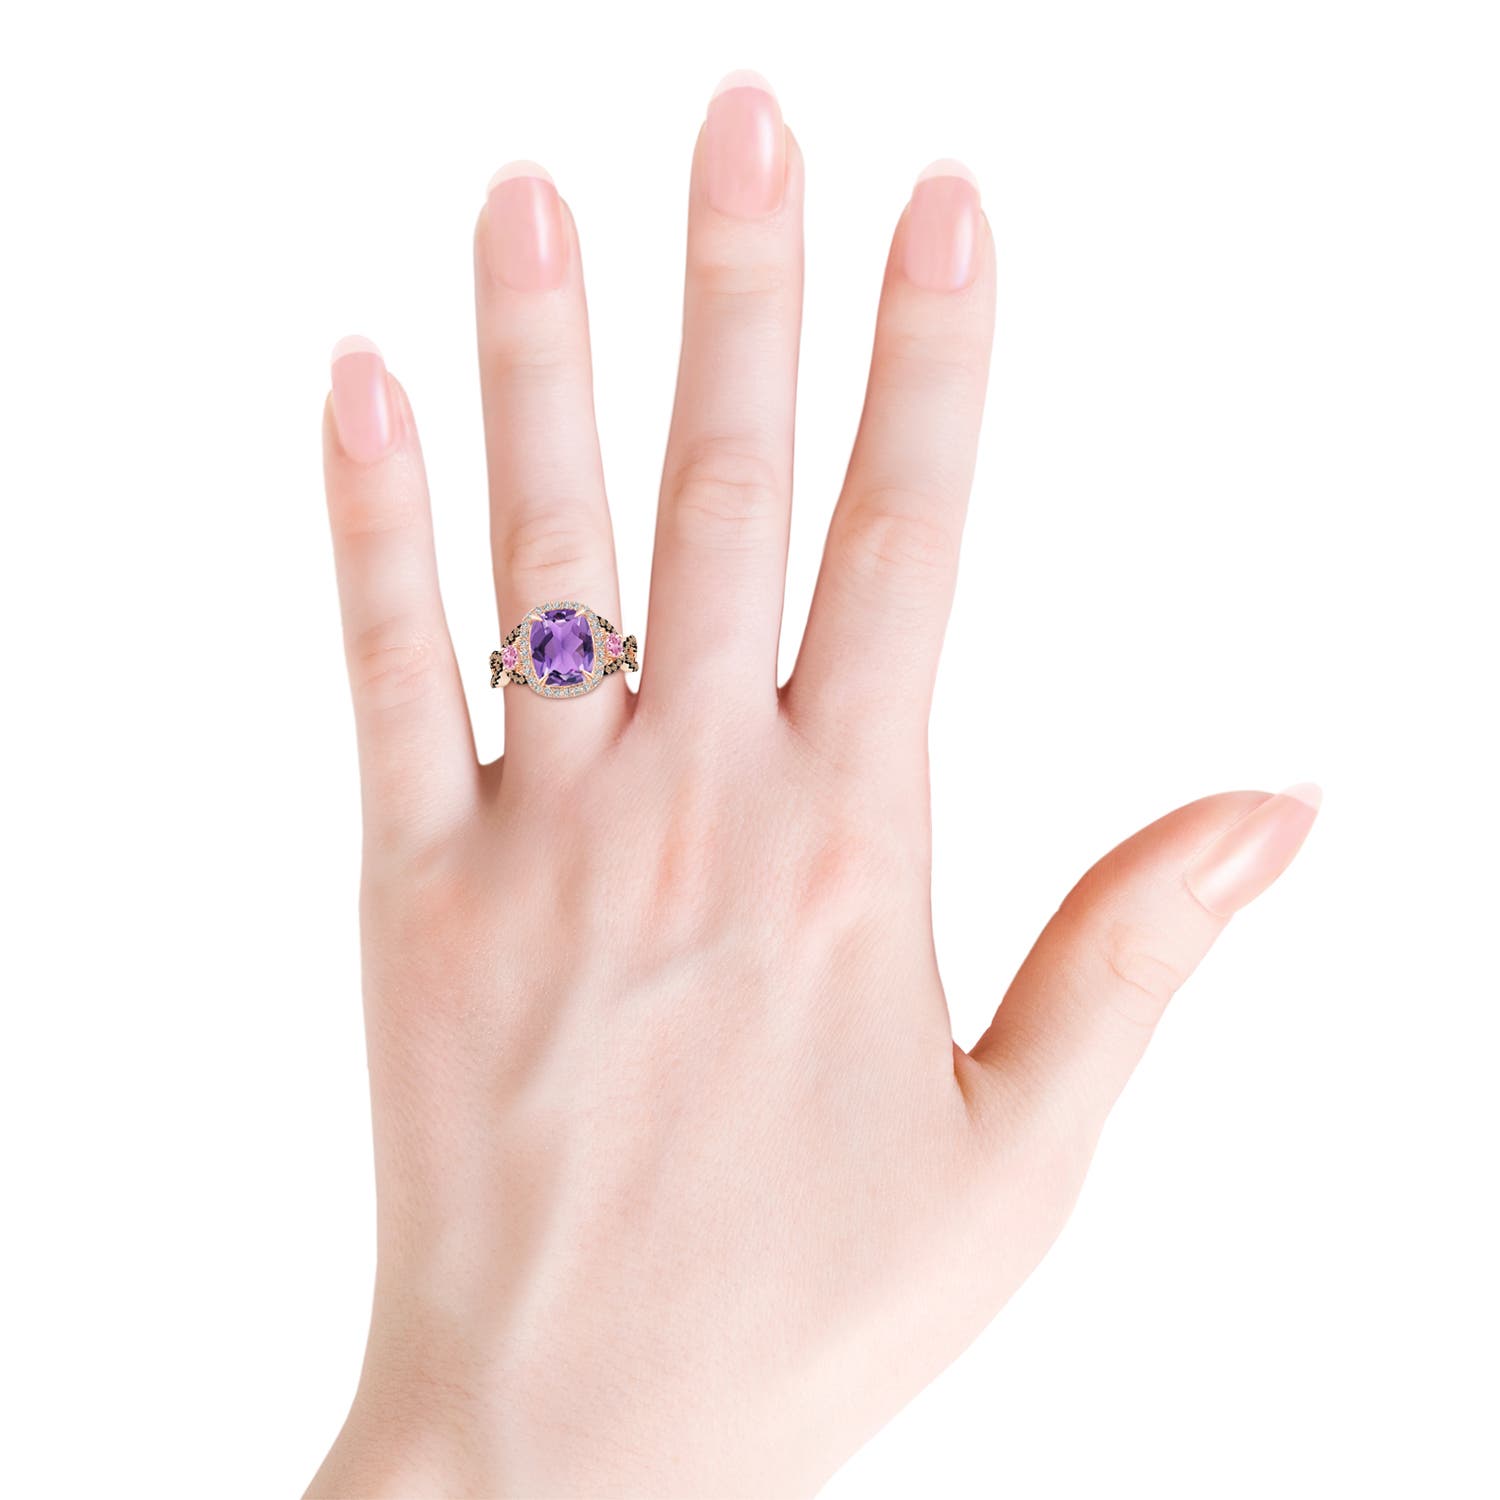 AA - Amethyst / 3.39 CT / 14 KT Rose Gold